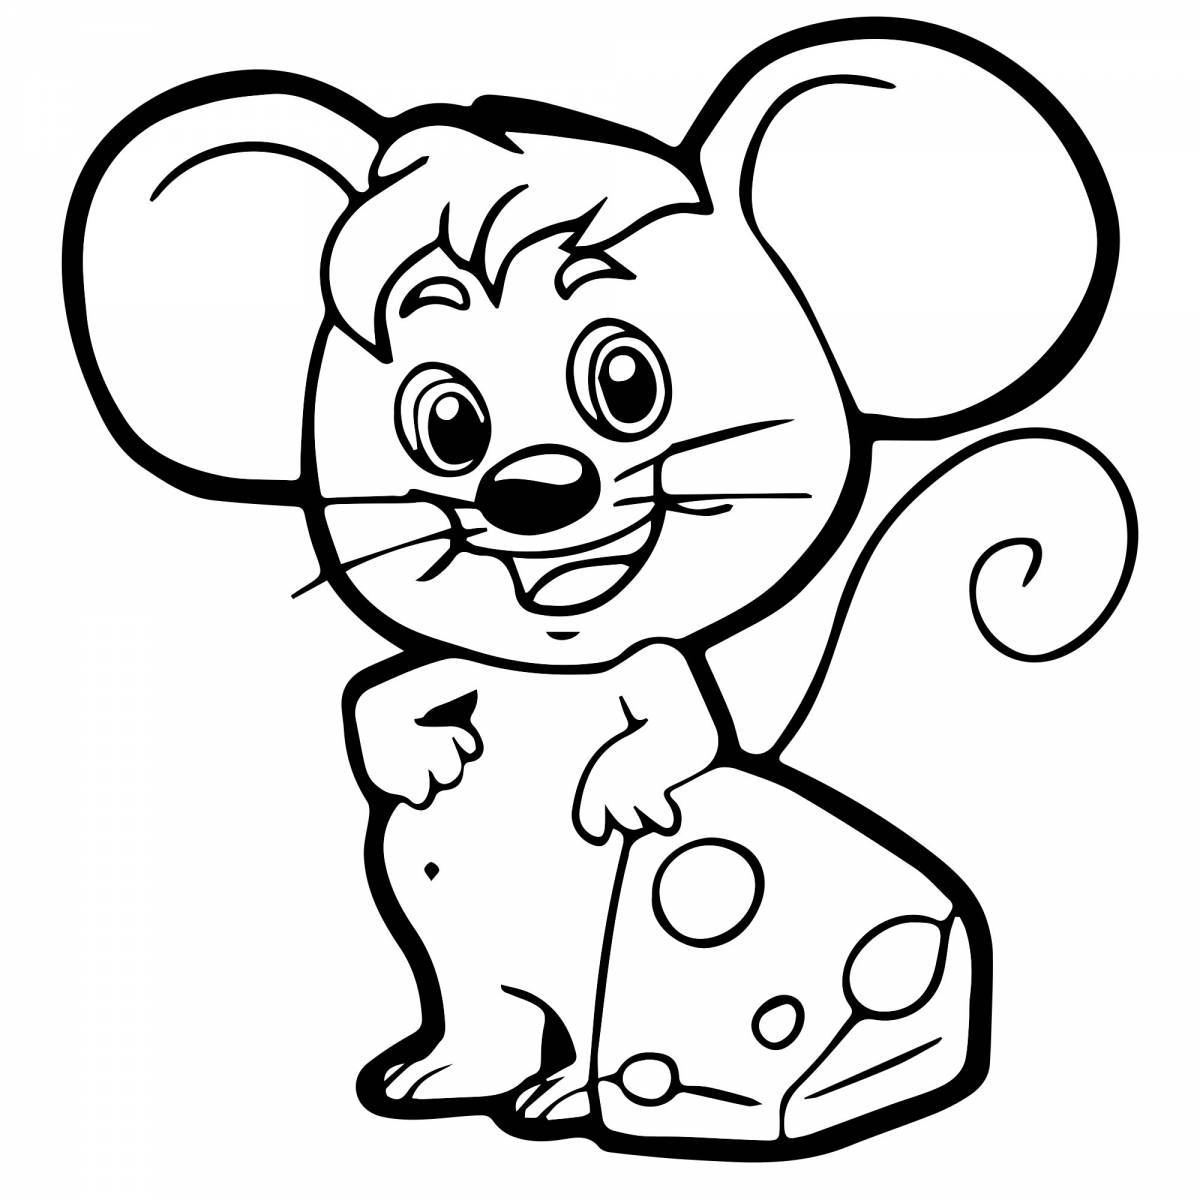 Mouse humorous coloring book